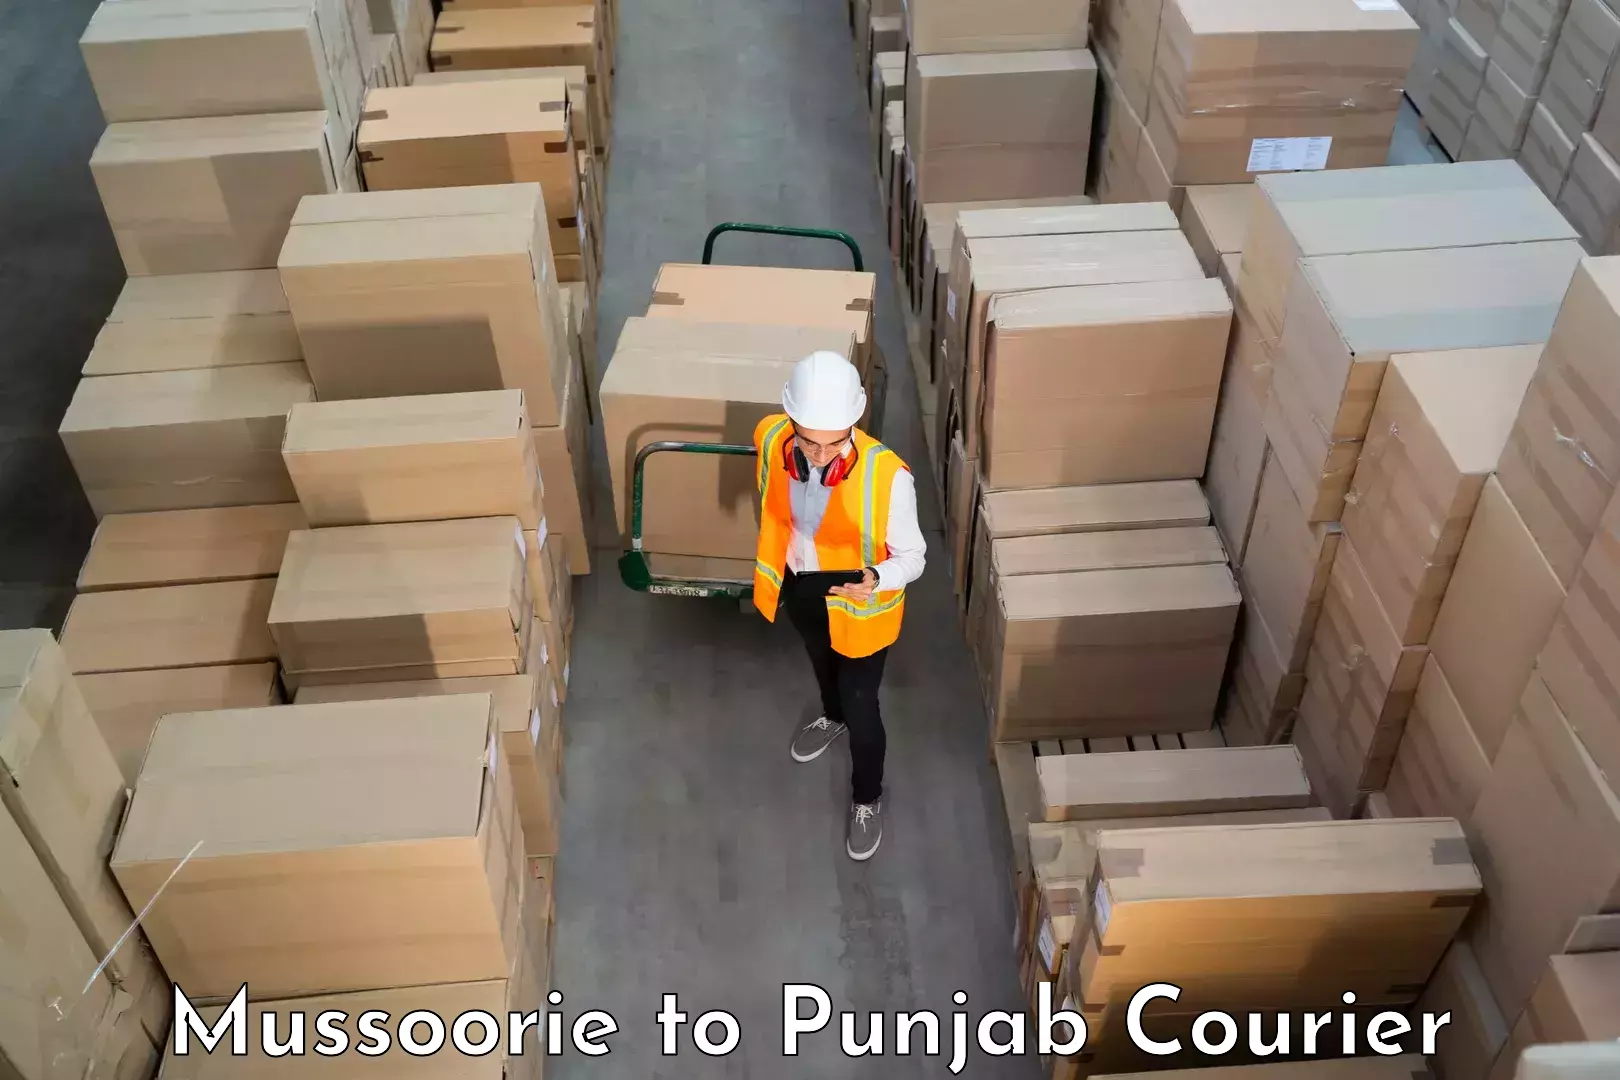 Professional moving company Mussoorie to Ludhiana